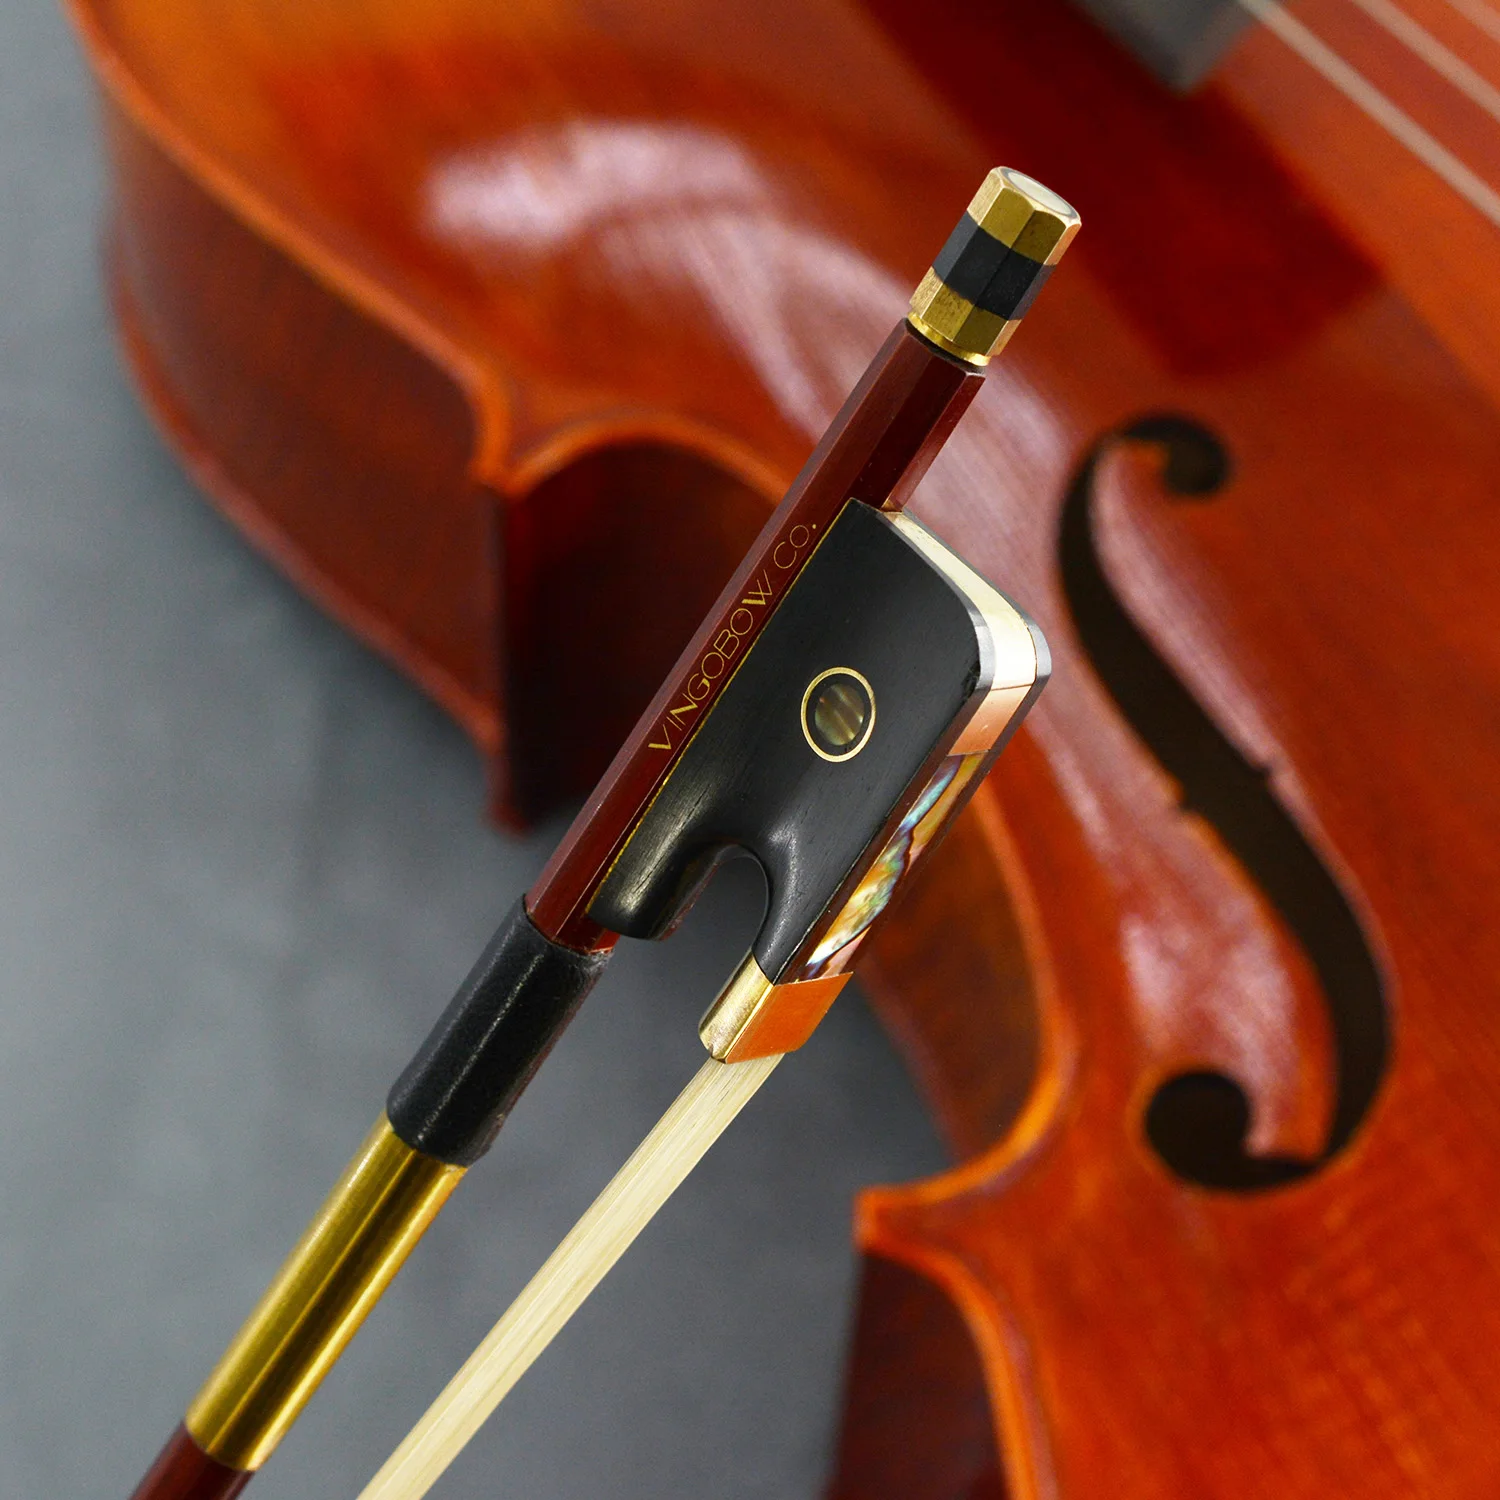 Gorgeous Pernambuco Cello Bow 2 Sizes Well Balance and Sweet Tone Ebony Frog Brass Alloy Fitted for Professional Player 420C enlarge